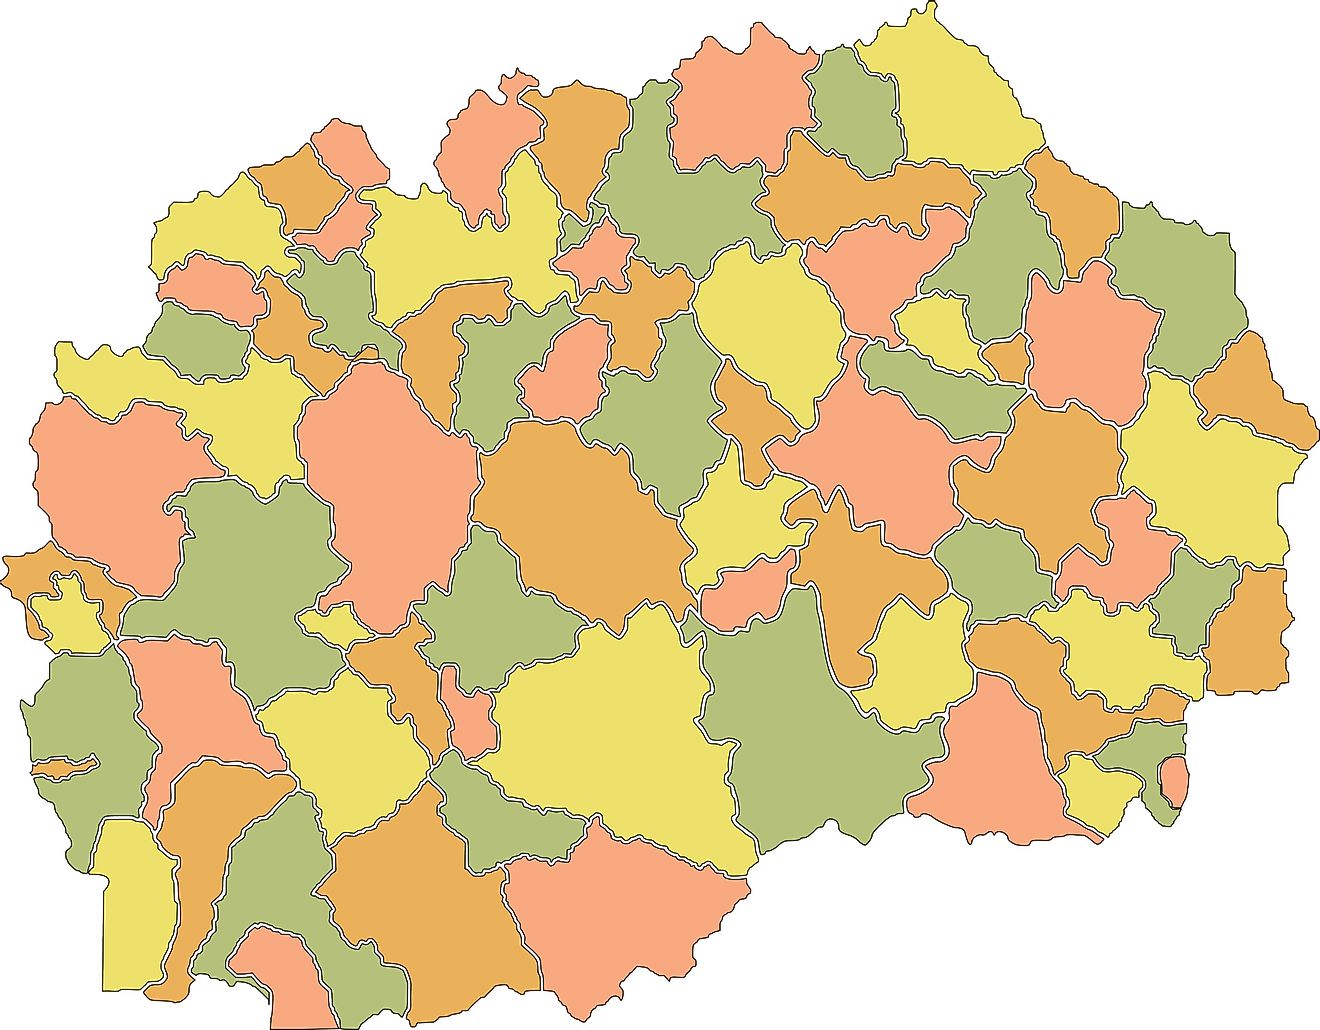 Political Map of North Macedonia showing its 80 municipalities and the capital city of Skopje